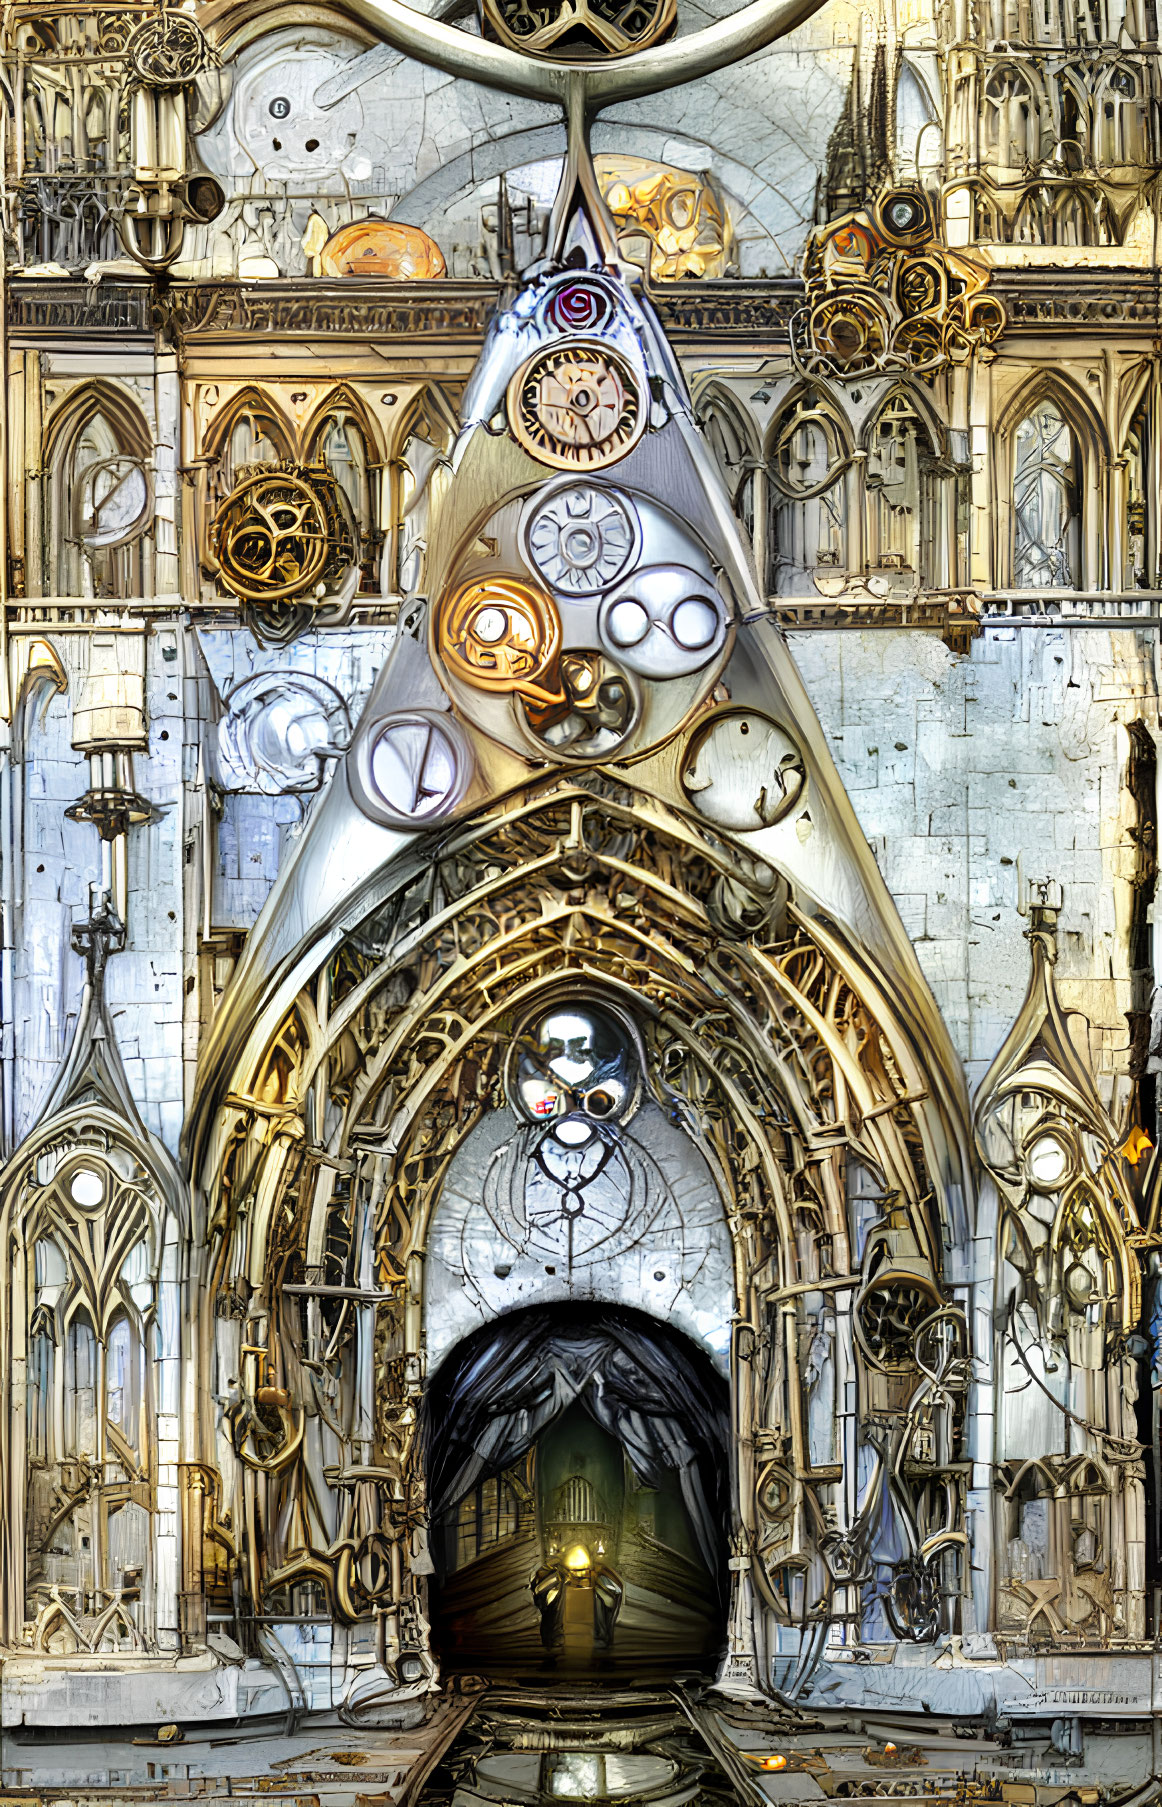 Steampunk cathedral interior with mechanical details and central figure